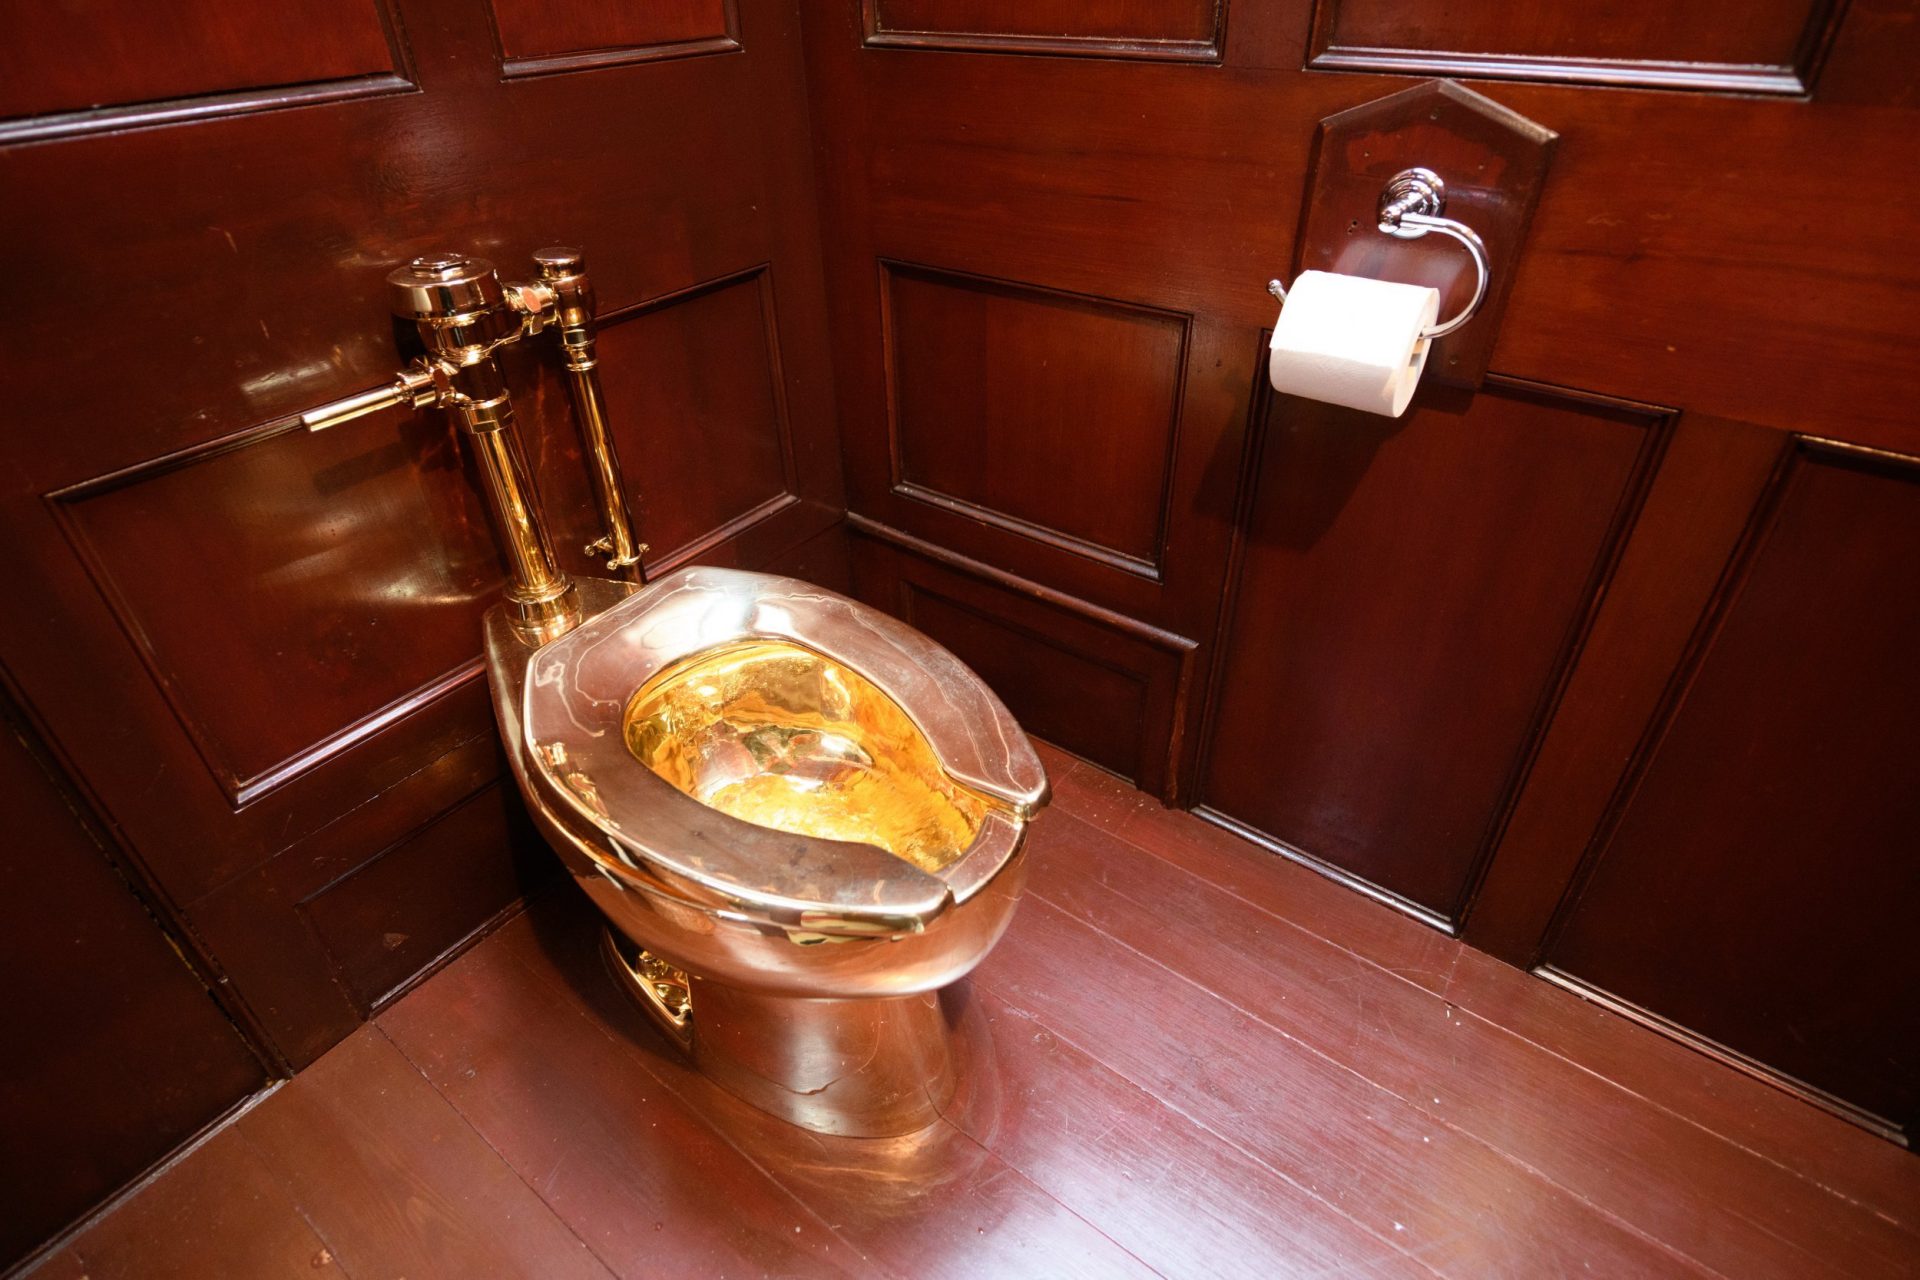 Thieves Steal Sh1.8 million Worth Gold Toilet From England’s Blenheim Palace